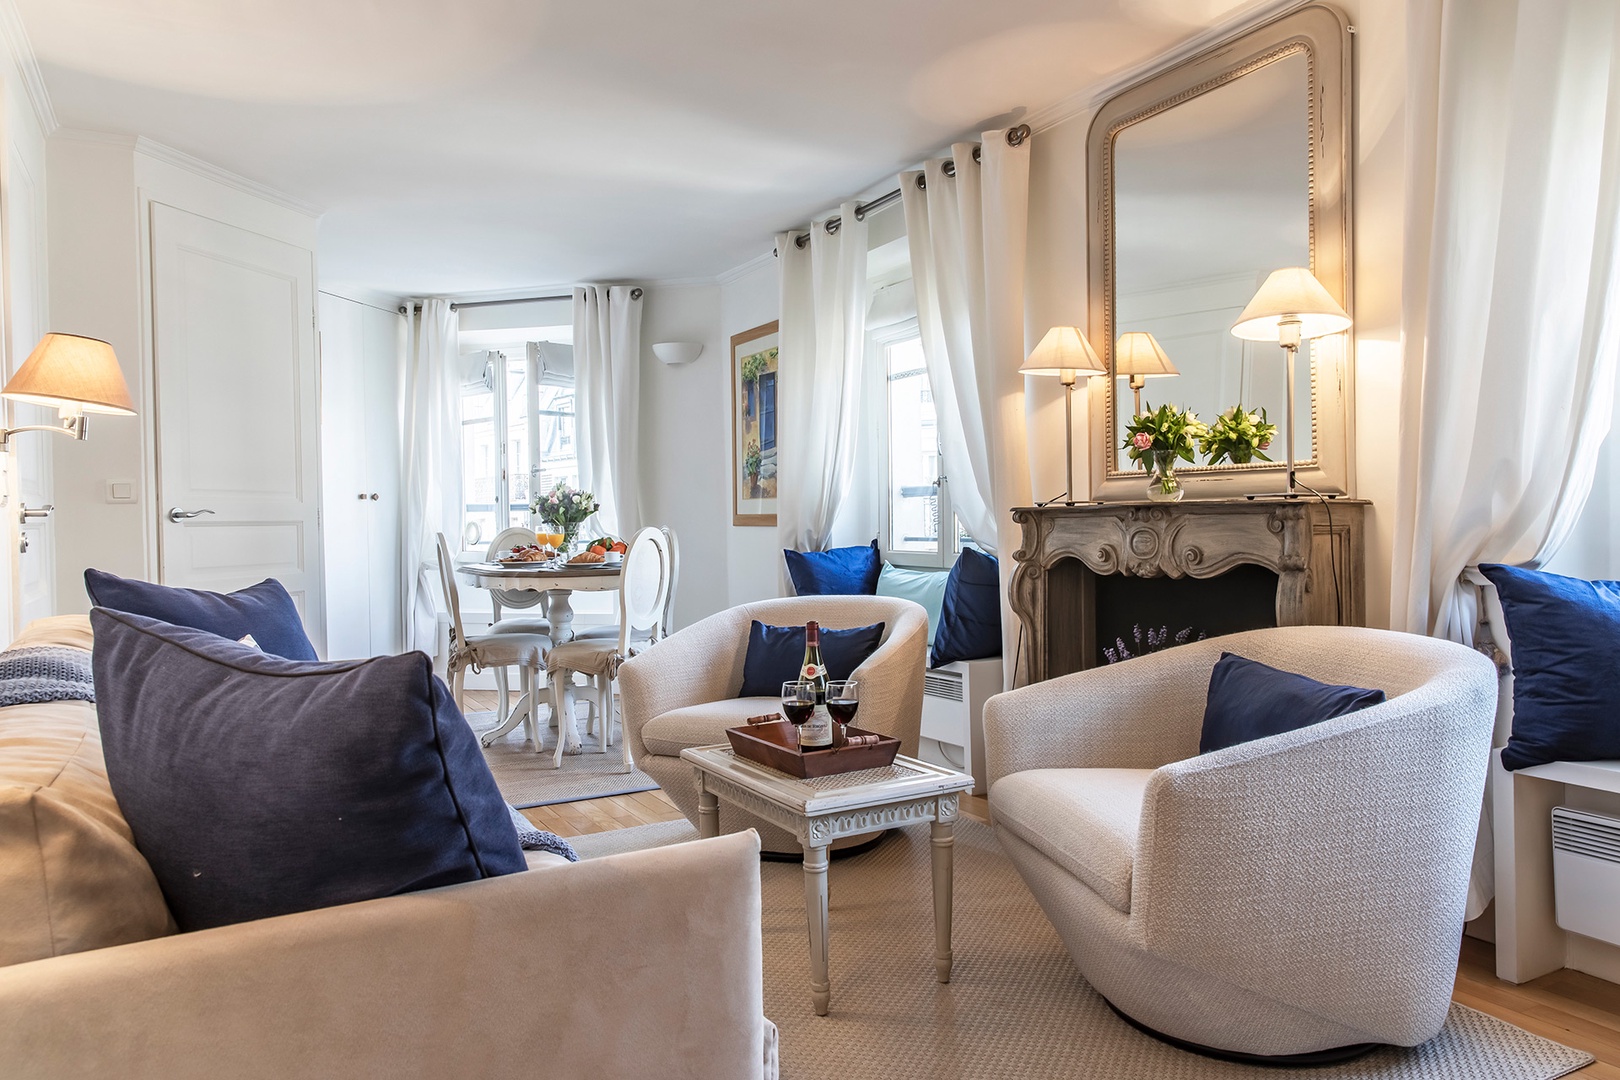 Welcome to our charming Pomerol apartment!